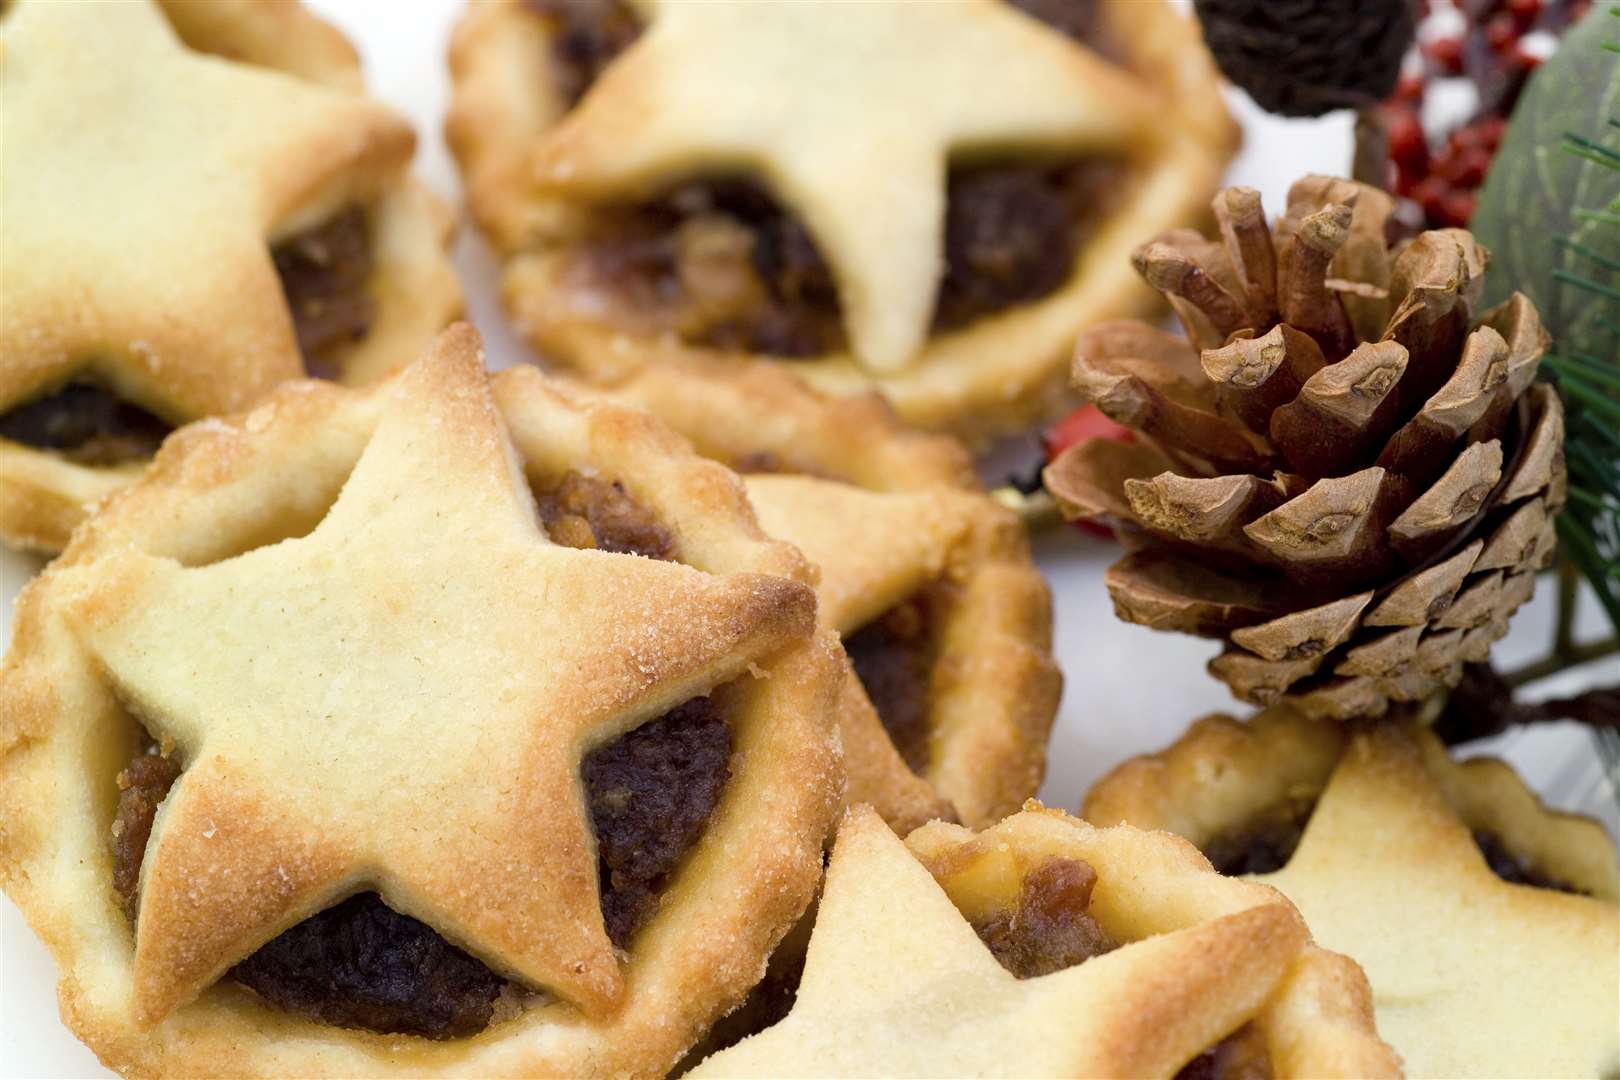 Many food and drink producers have already missed out on a key month of trading in the run-up to the festive season